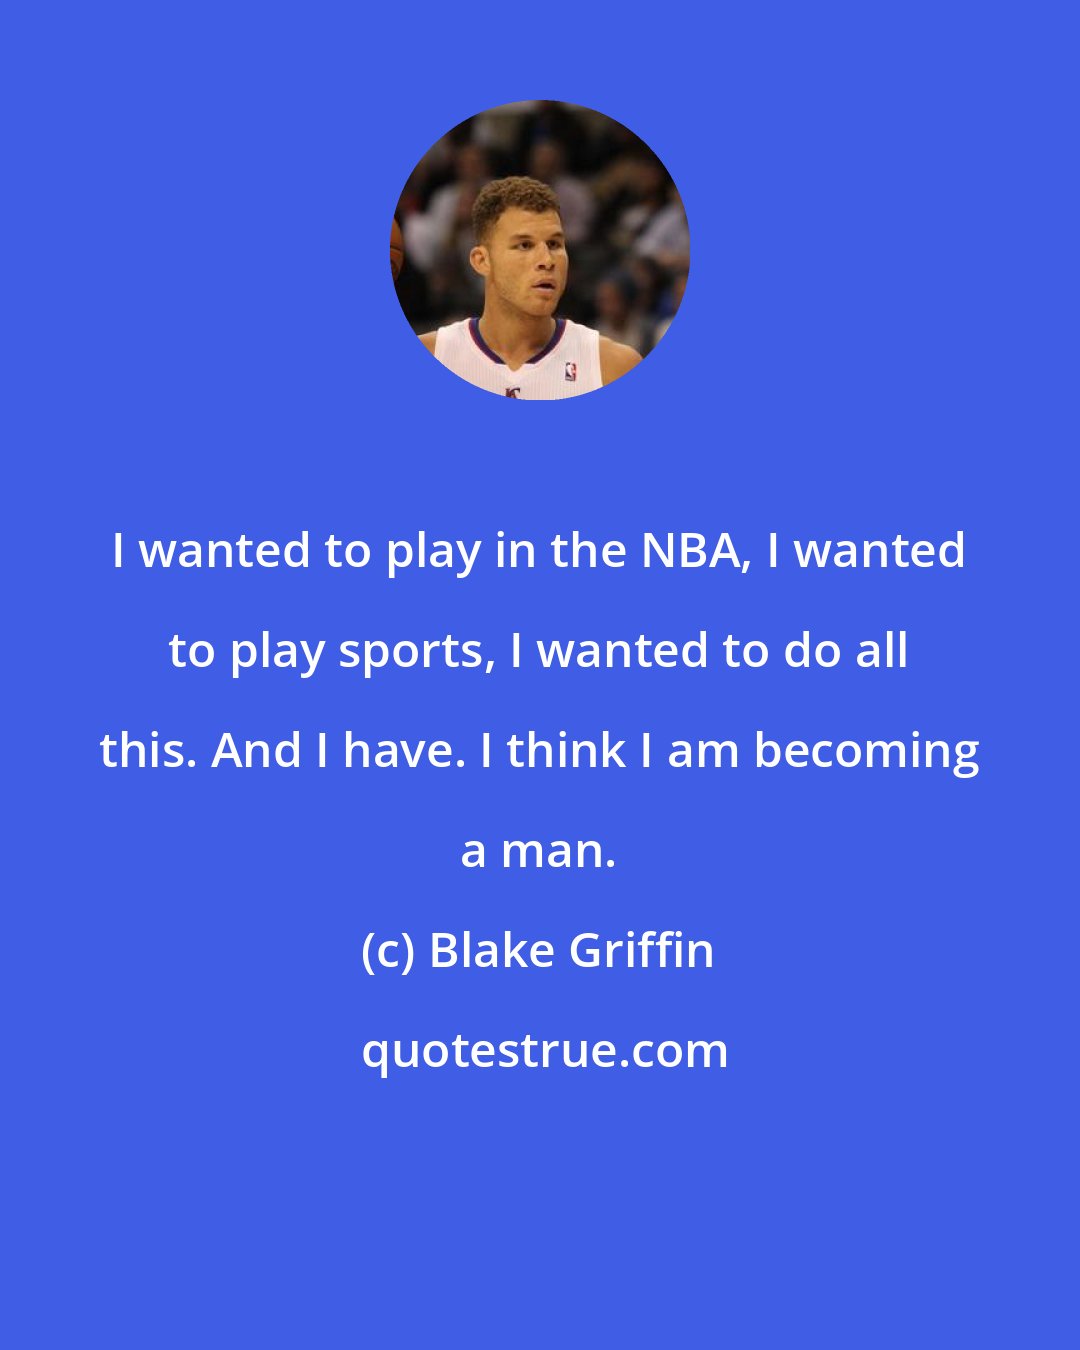 Blake Griffin: I wanted to play in the NBA, I wanted to play sports, I wanted to do all this. And I have. I think I am becoming a man.